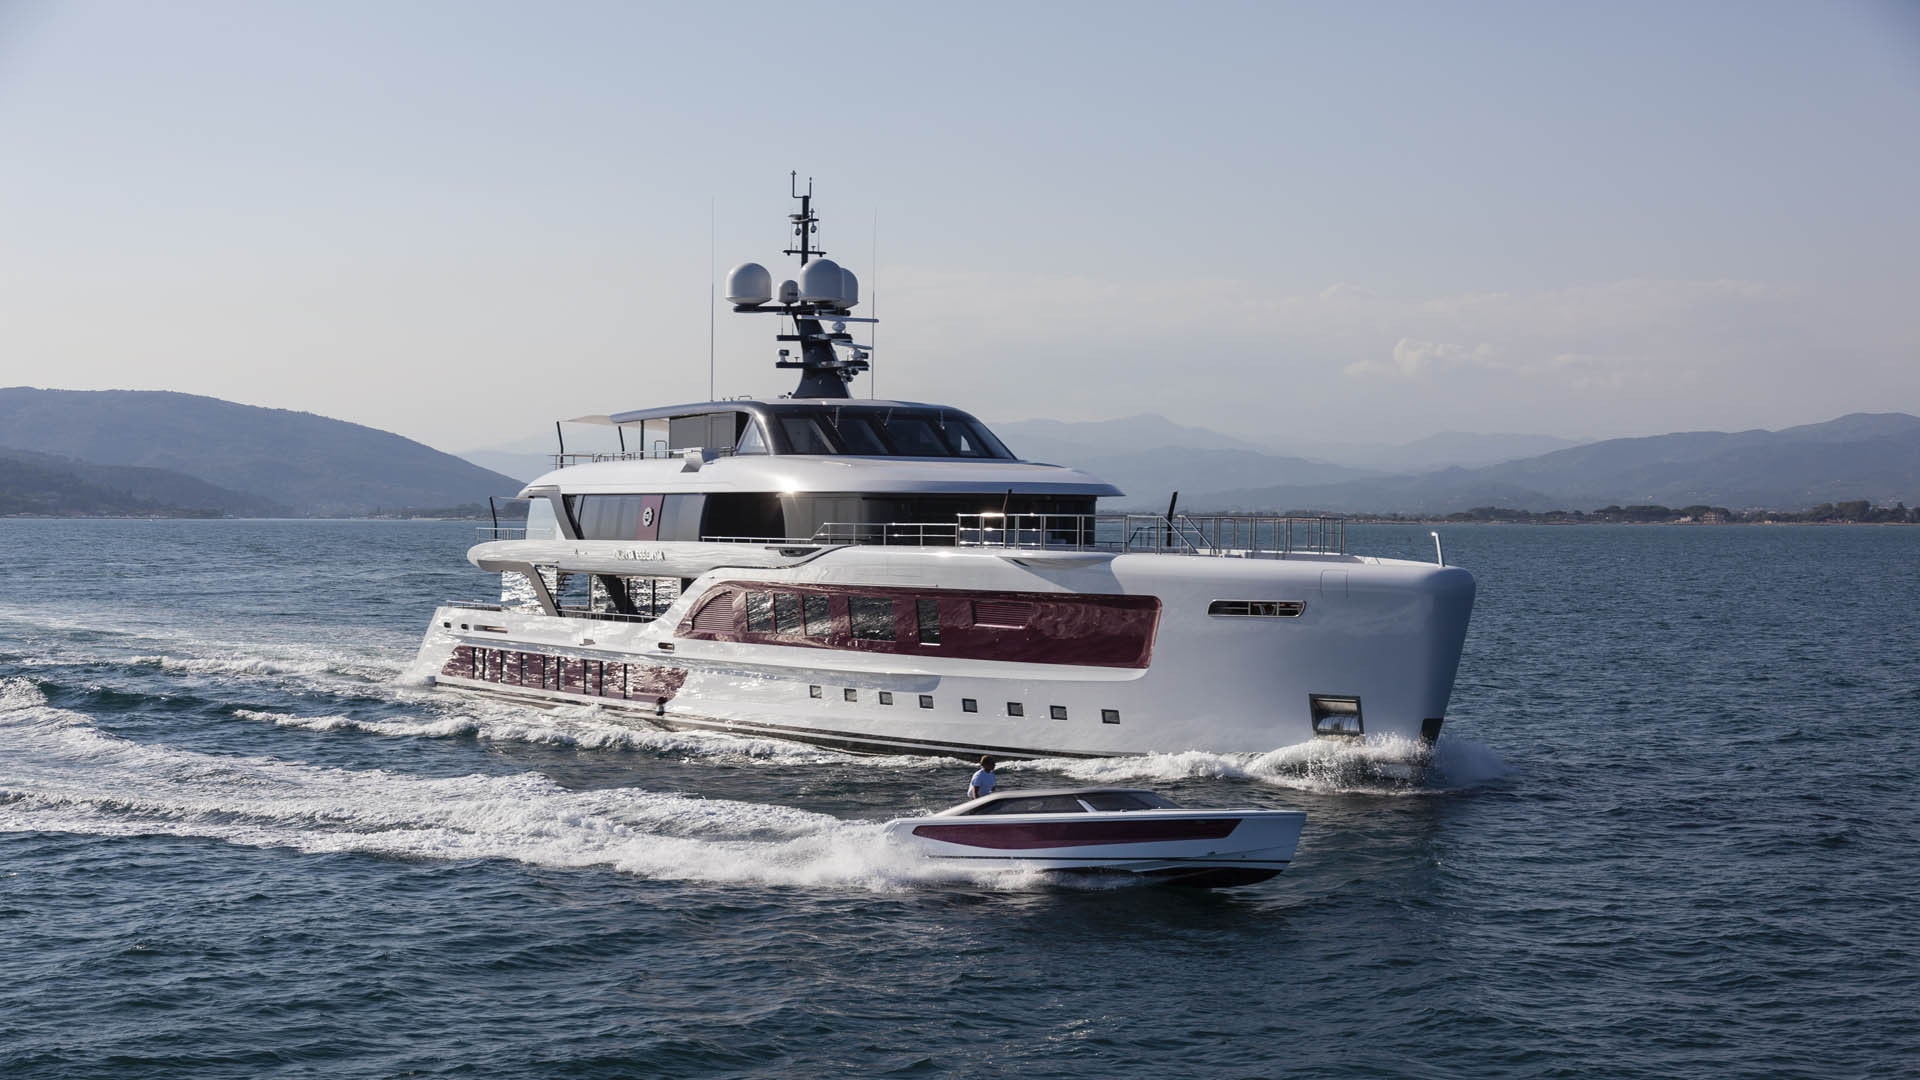 Russian Millionaire’s Extravagant Superyacht Takes Customization to Another Level